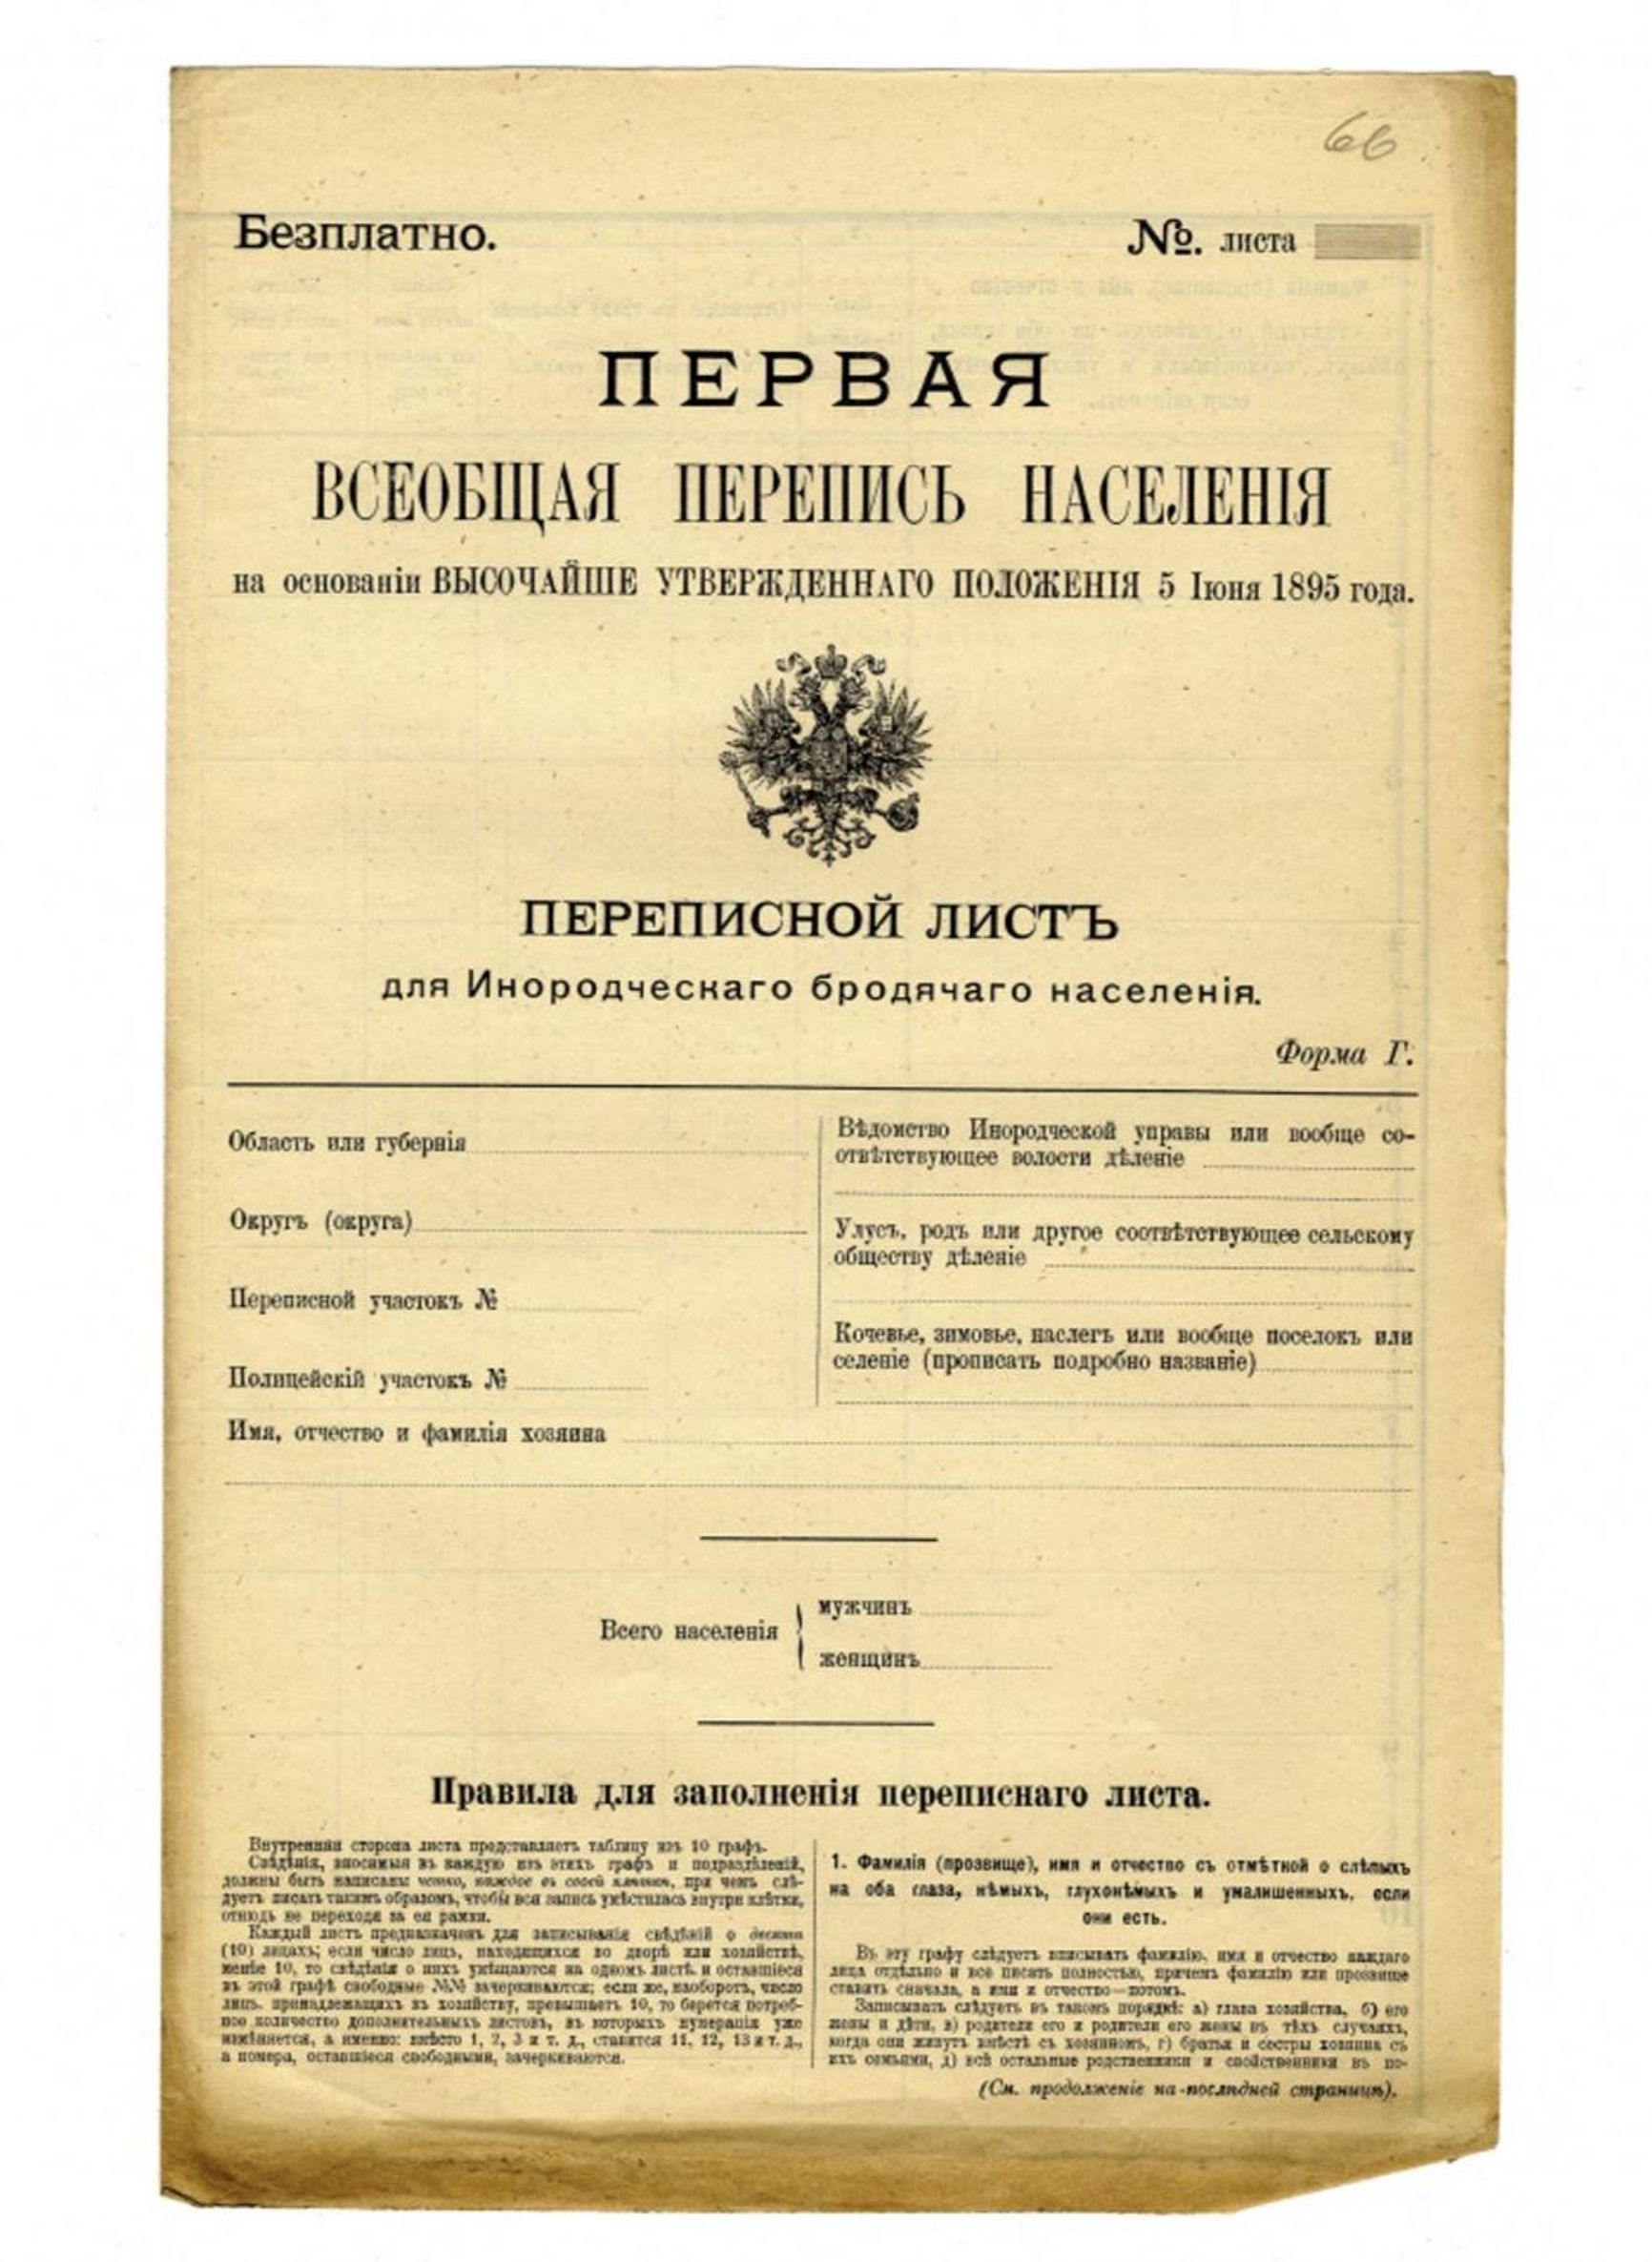 Form of the First General Population Census of the Russian Empire